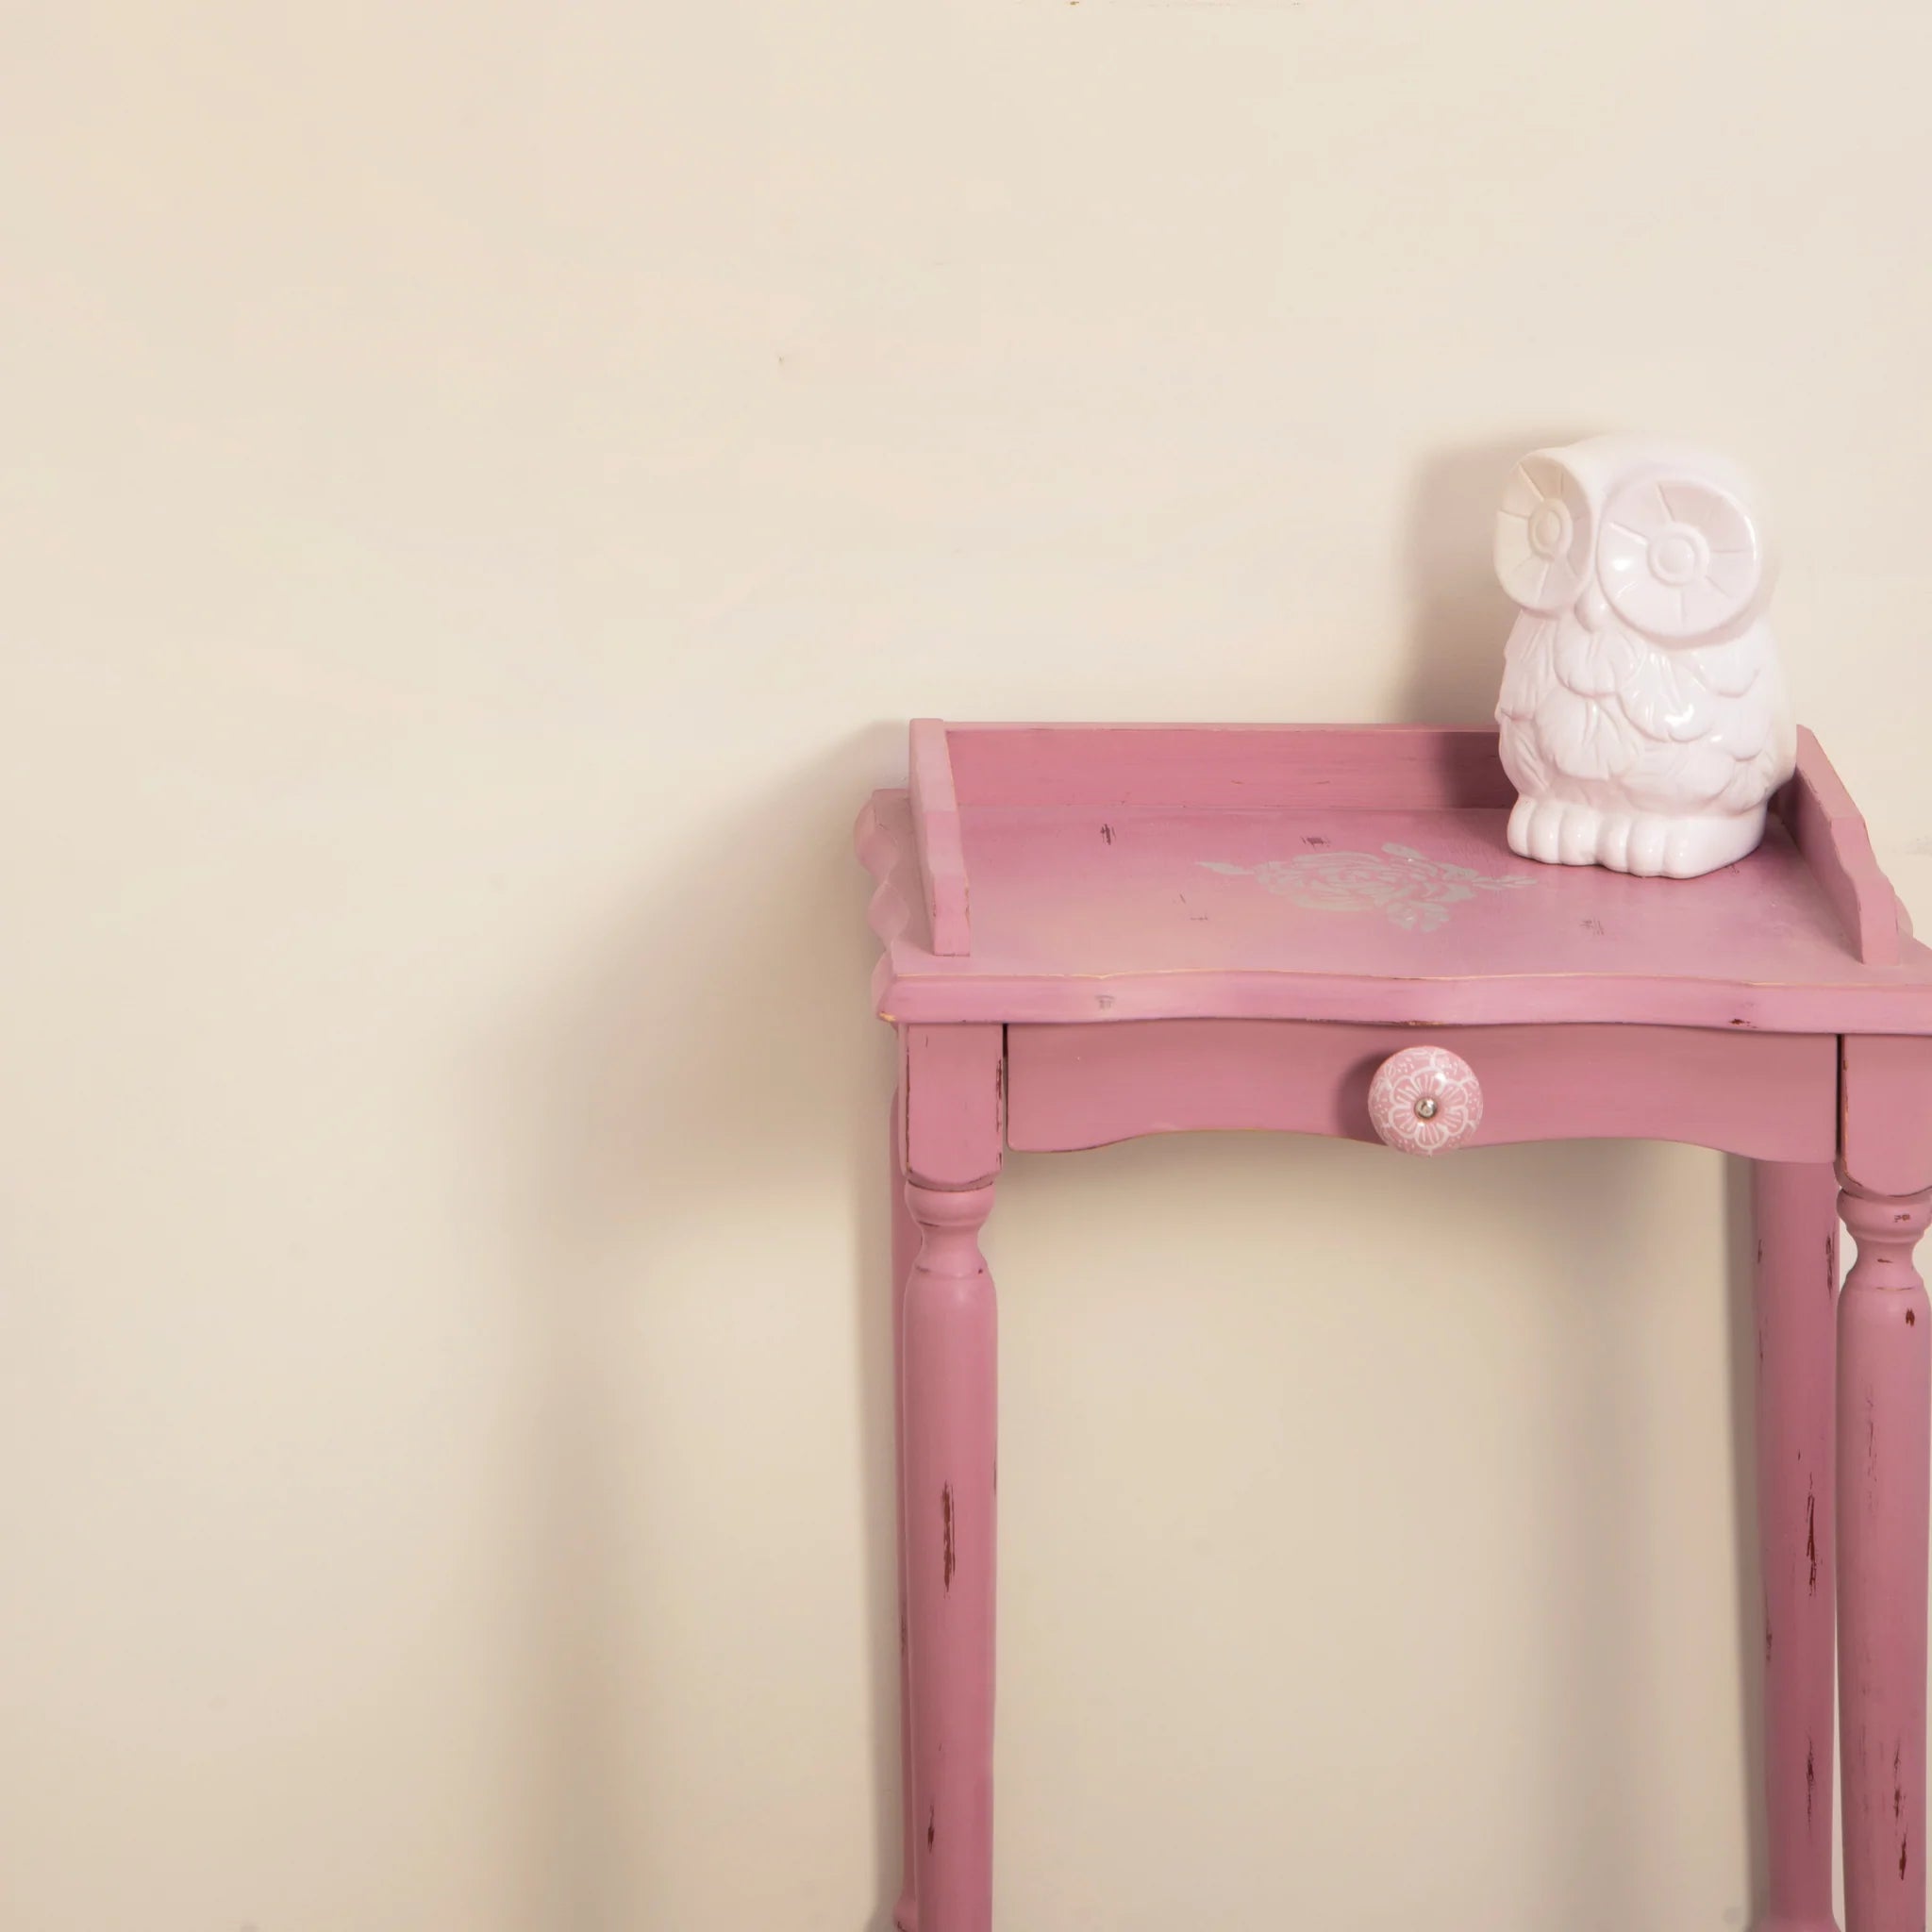 Frenchic Paint | Parchment Chalk Wall Paint by Weirs of Baggot St